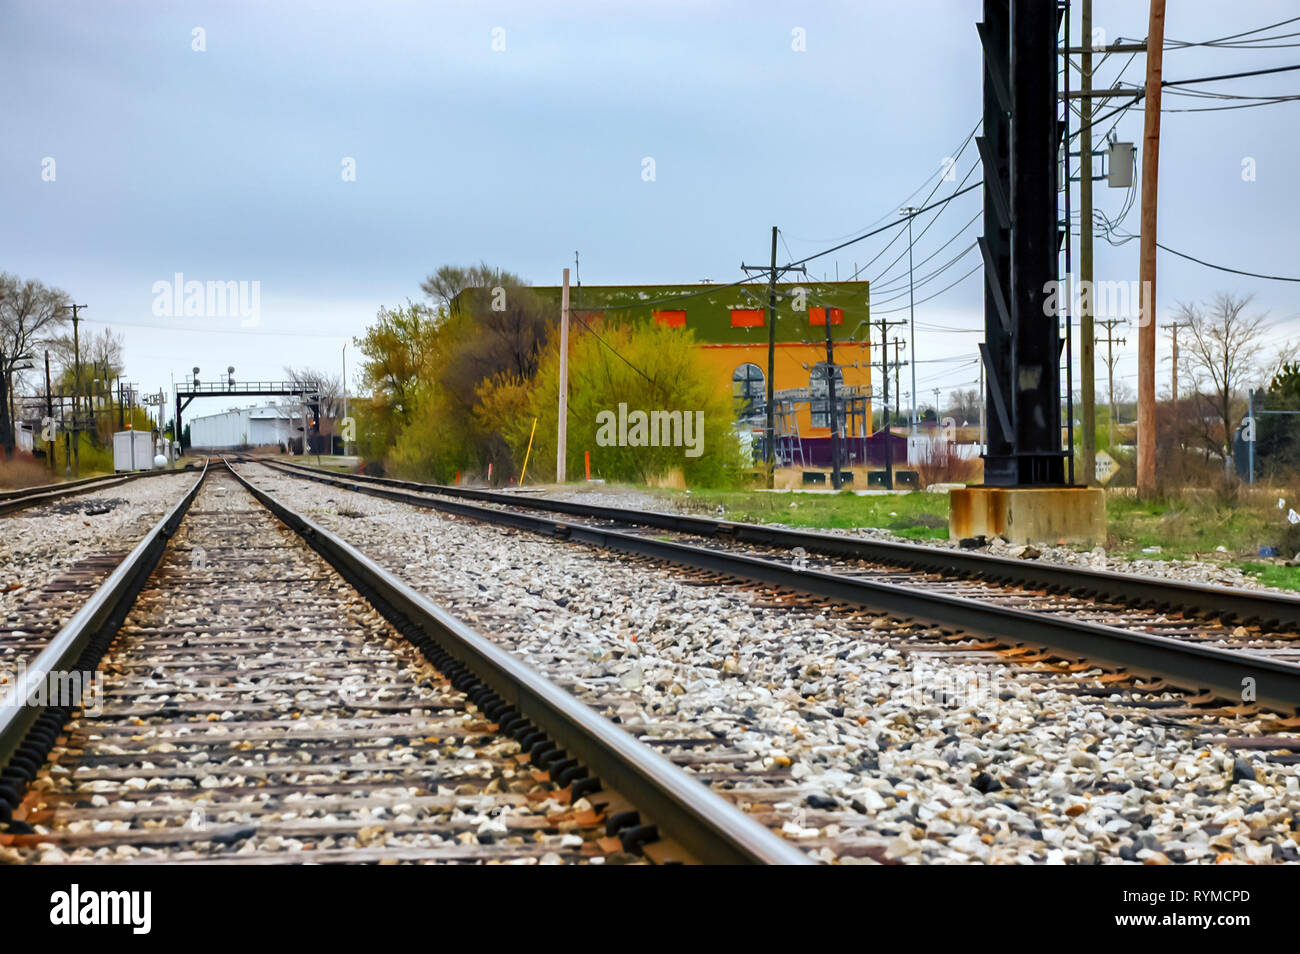 Railway tracks converging and disappearing into the horizon. A signal gantry is visible at the distance. Pontiac, Michigan, USA. Stock Photo